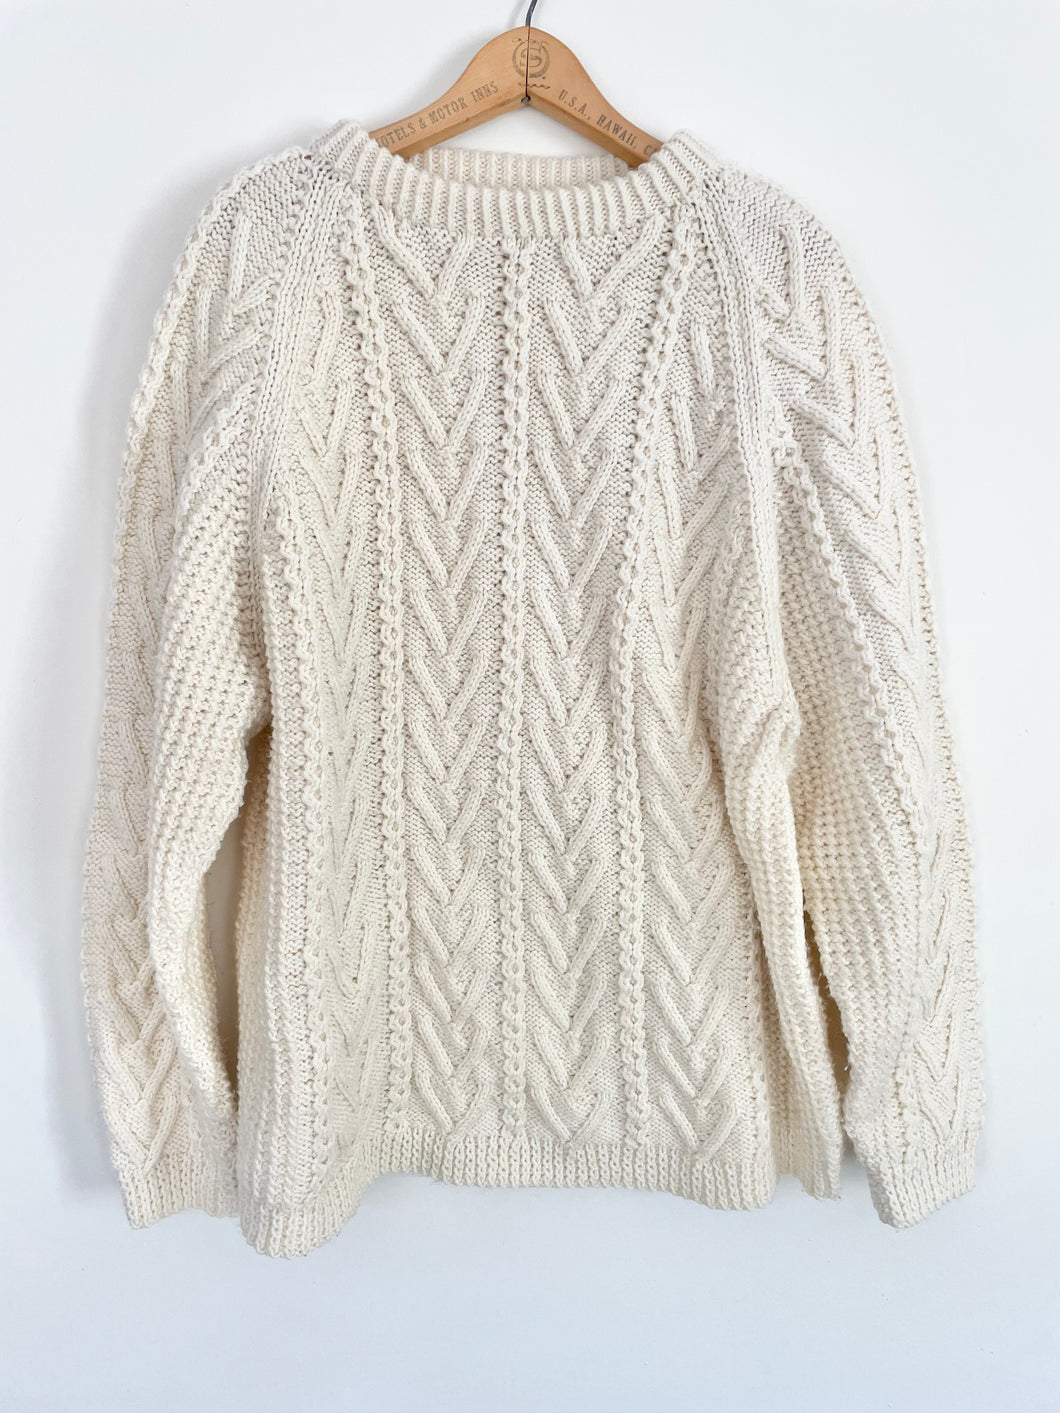 handknit cableknit sweater